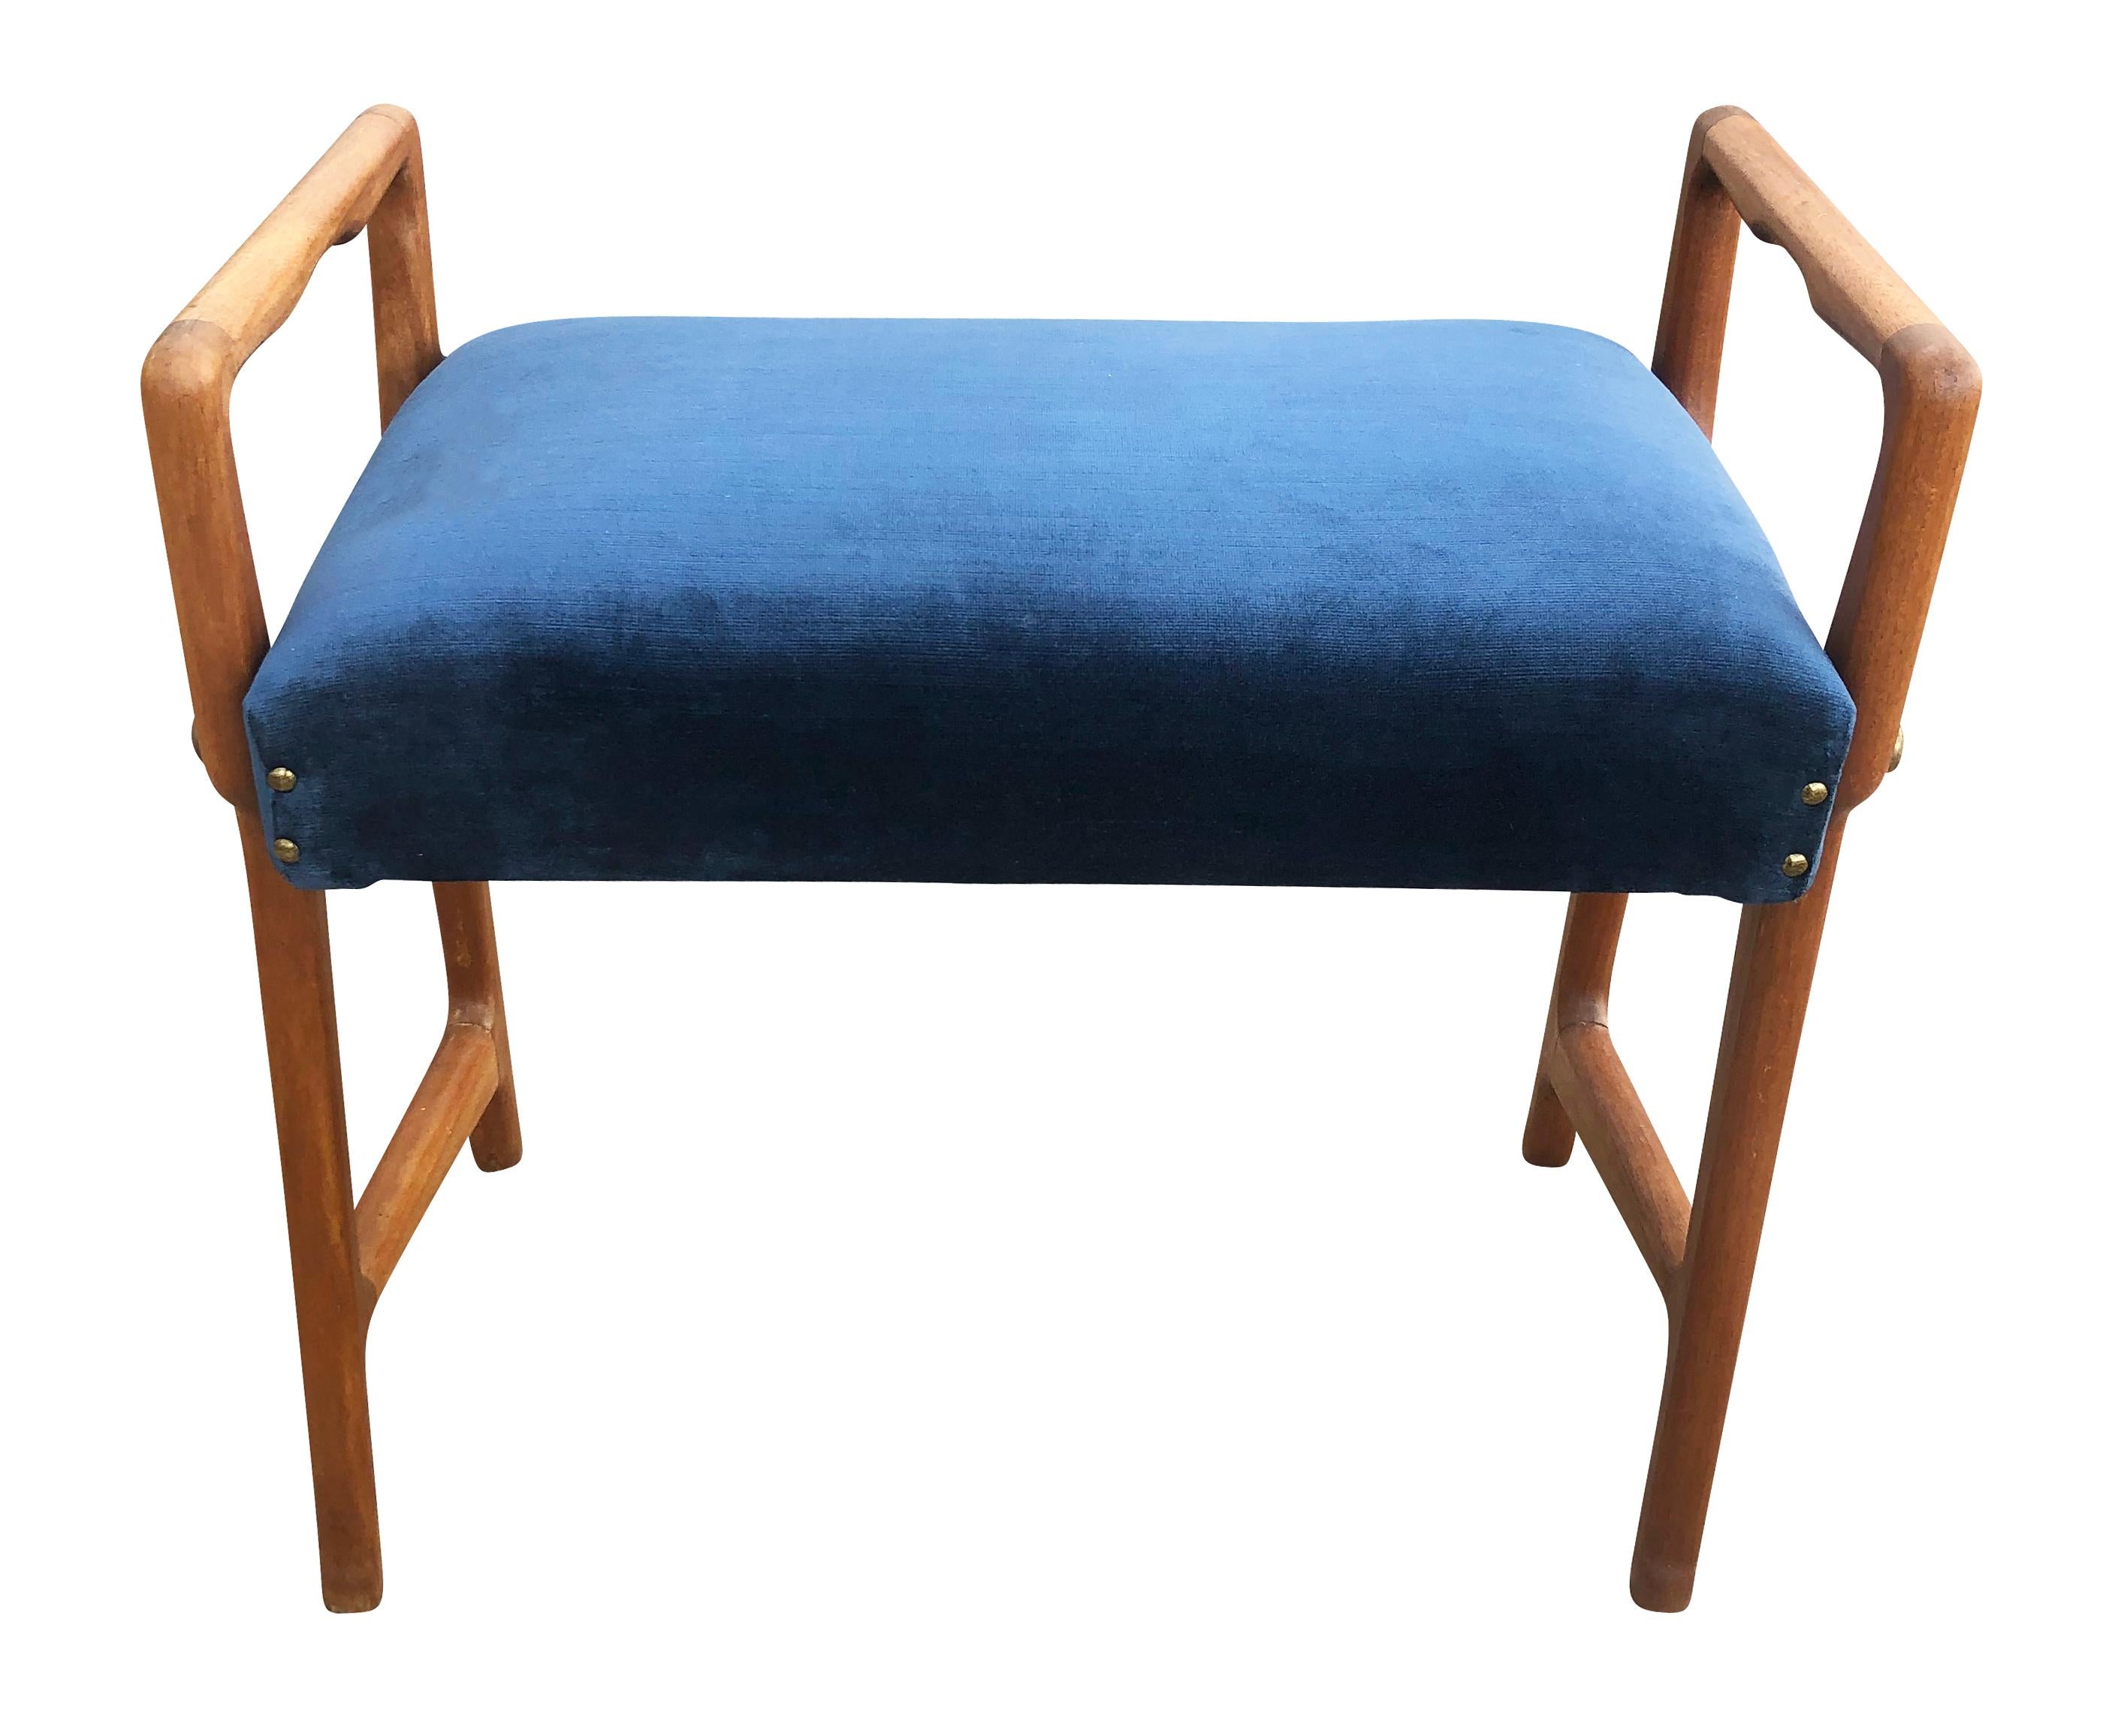 Petite Italian midcentury bench with wood framing and a blue velvet seat.

Condition: Minor wear consistent with age and use. Recently recovered.

Measure: Width 21.75”

Depth 12.5”

Height 30.5”

Seat height 17.75”.
     
   